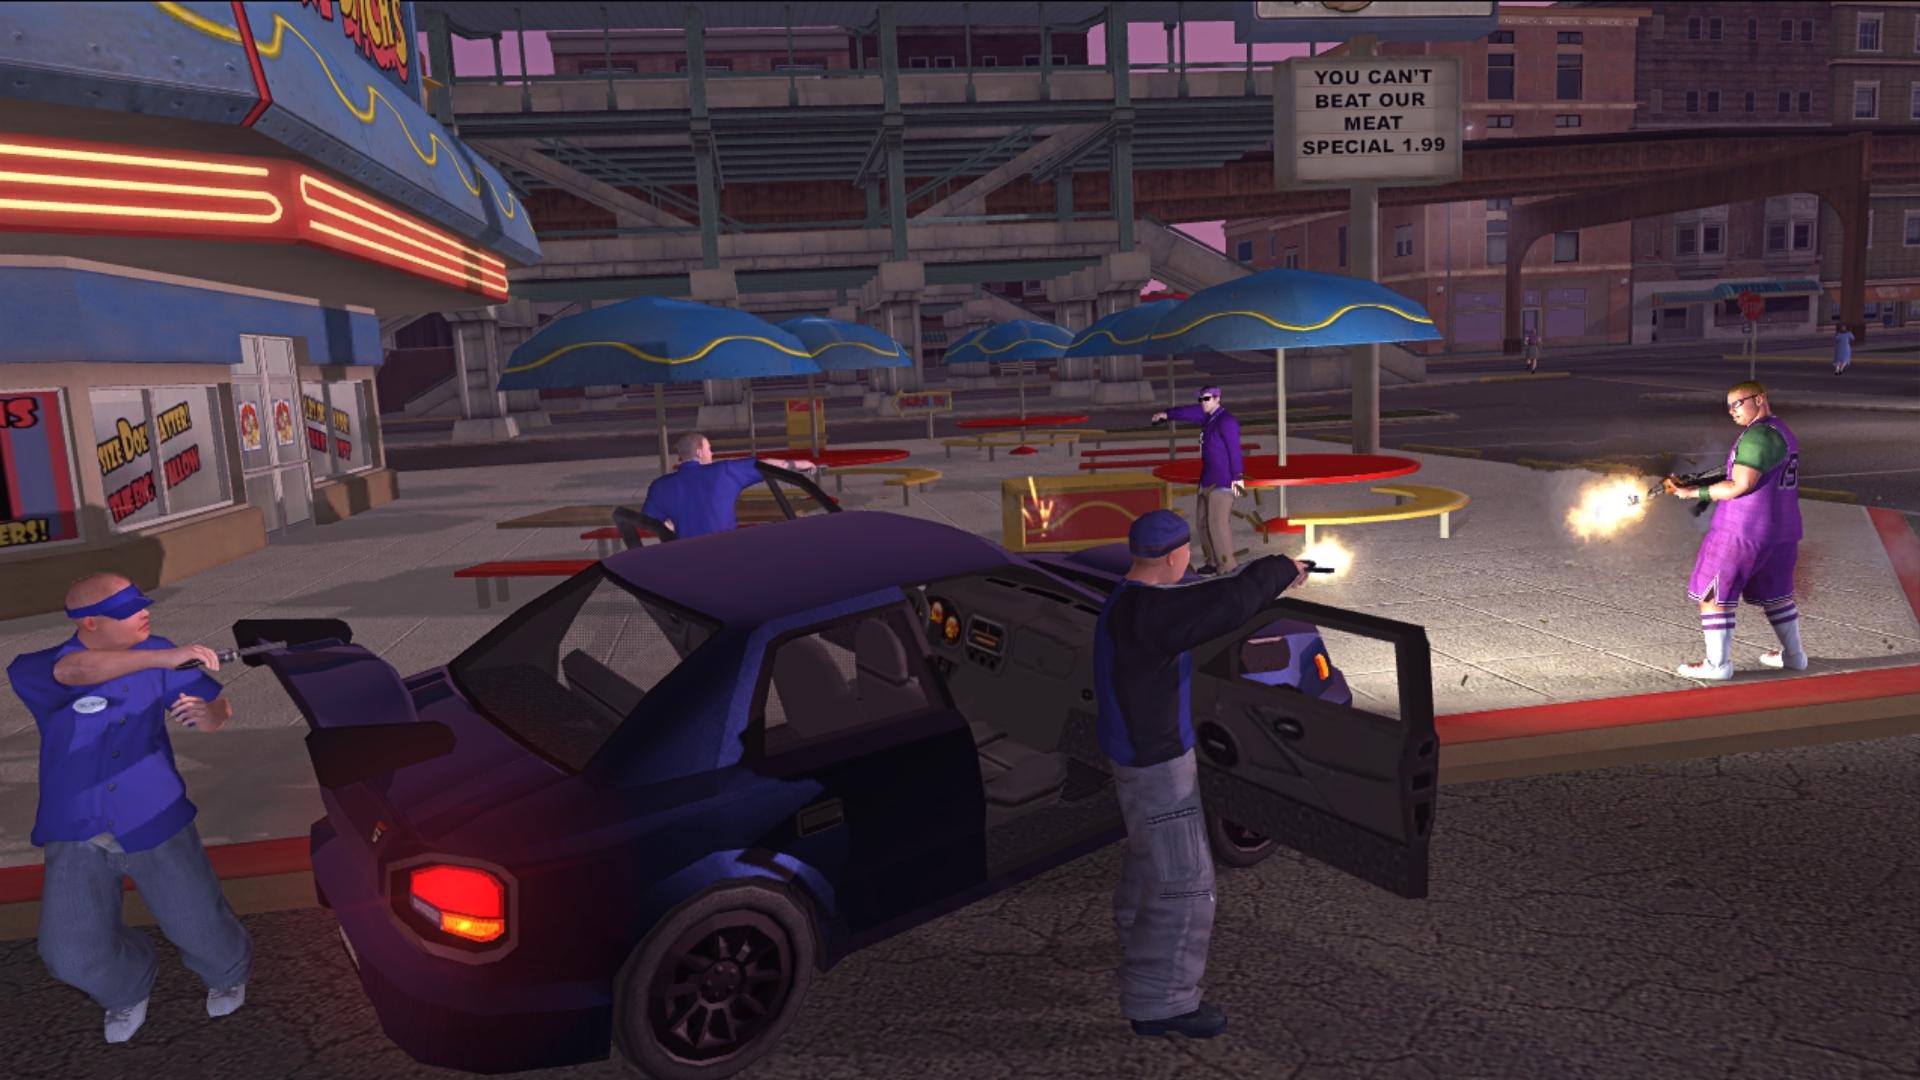 Interesting Facts About Saints Row Game - Download Saints Row Game